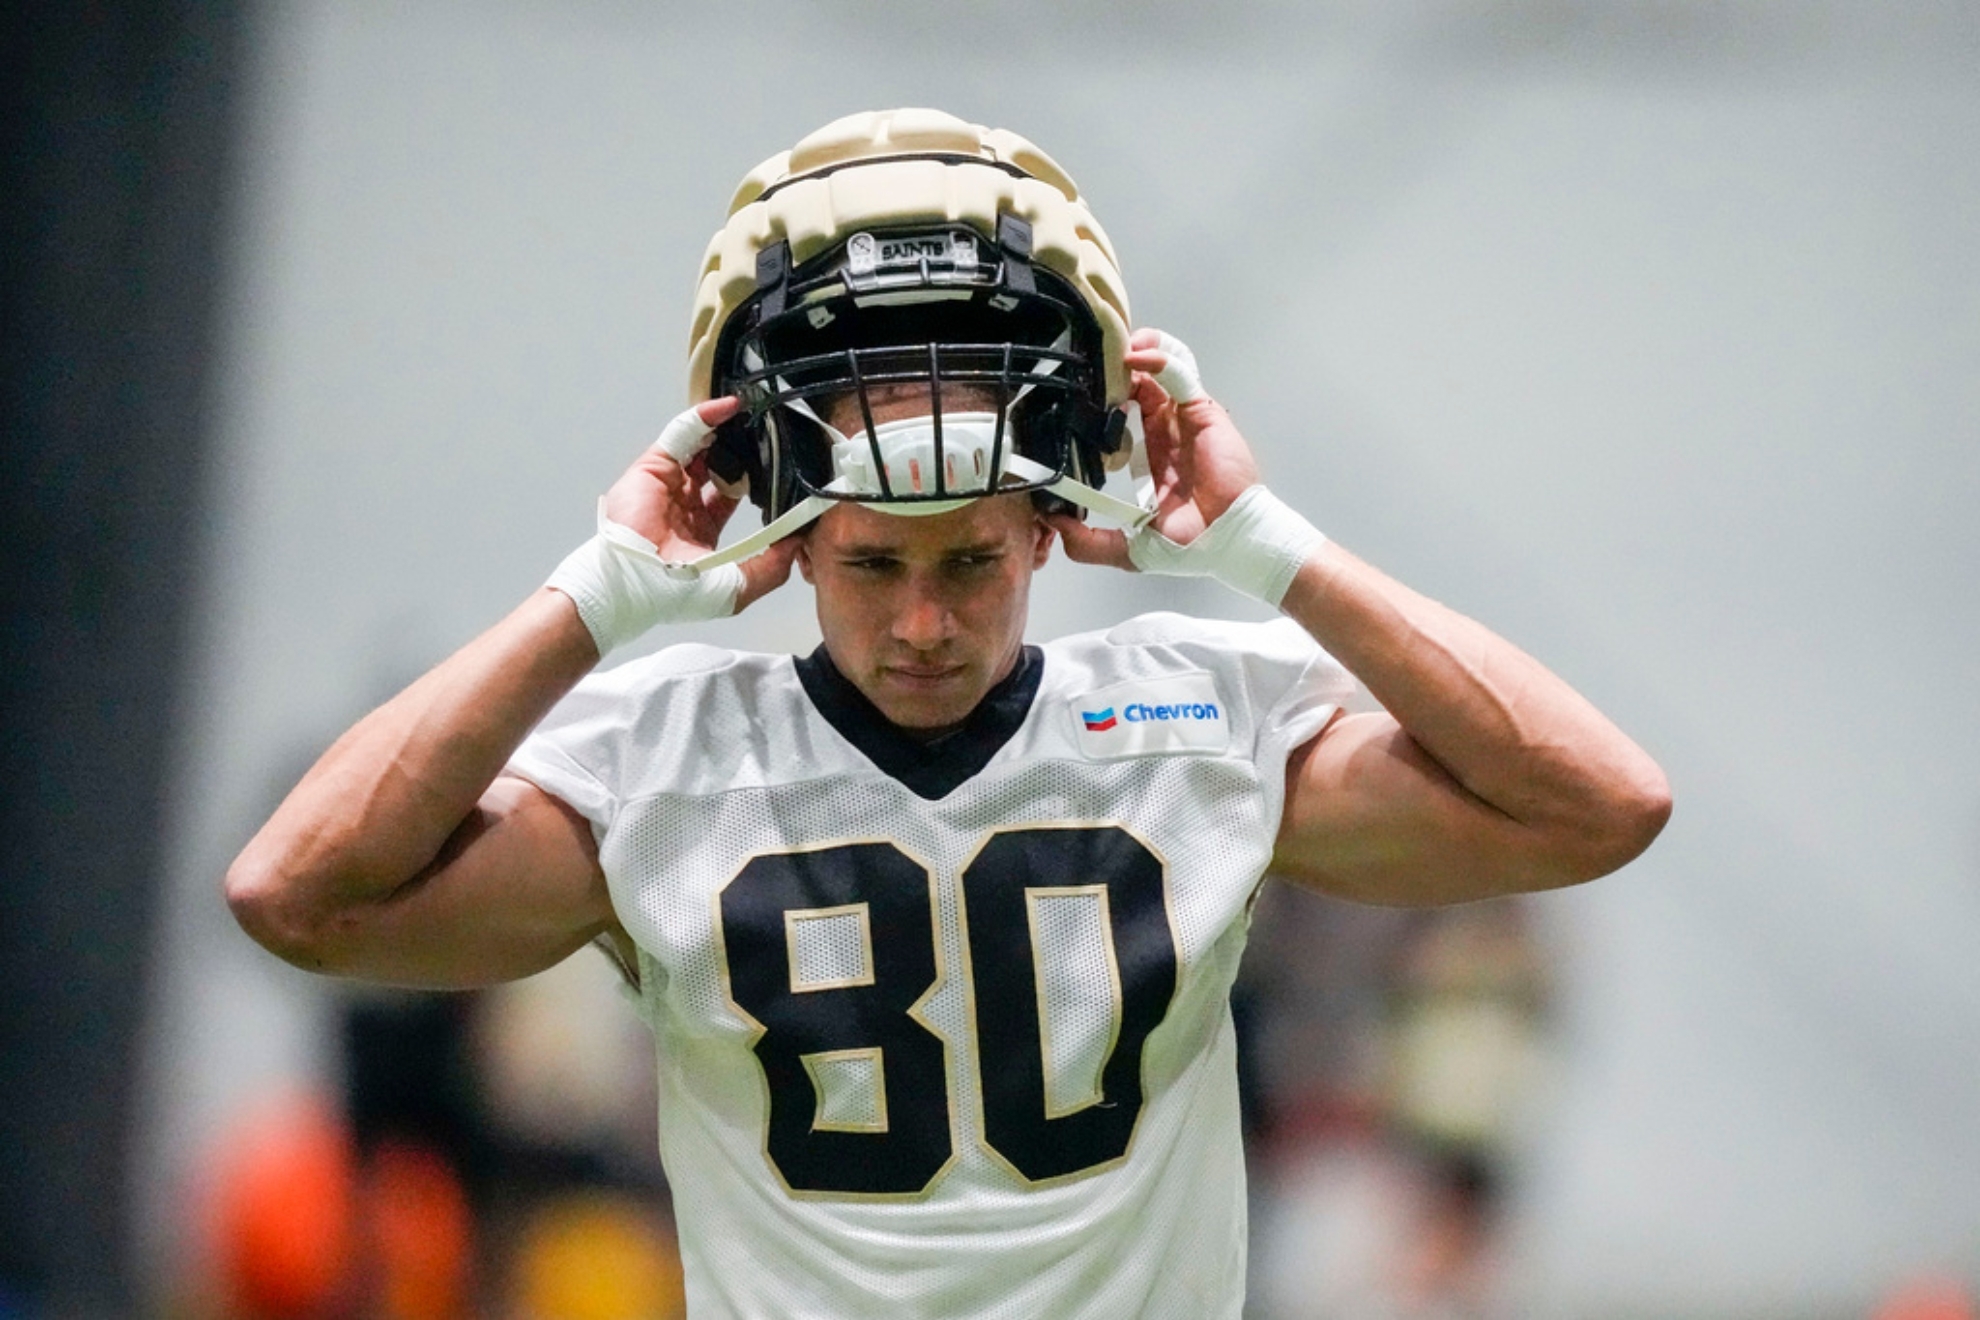 Graham now will focus on his second stint with New Orleans